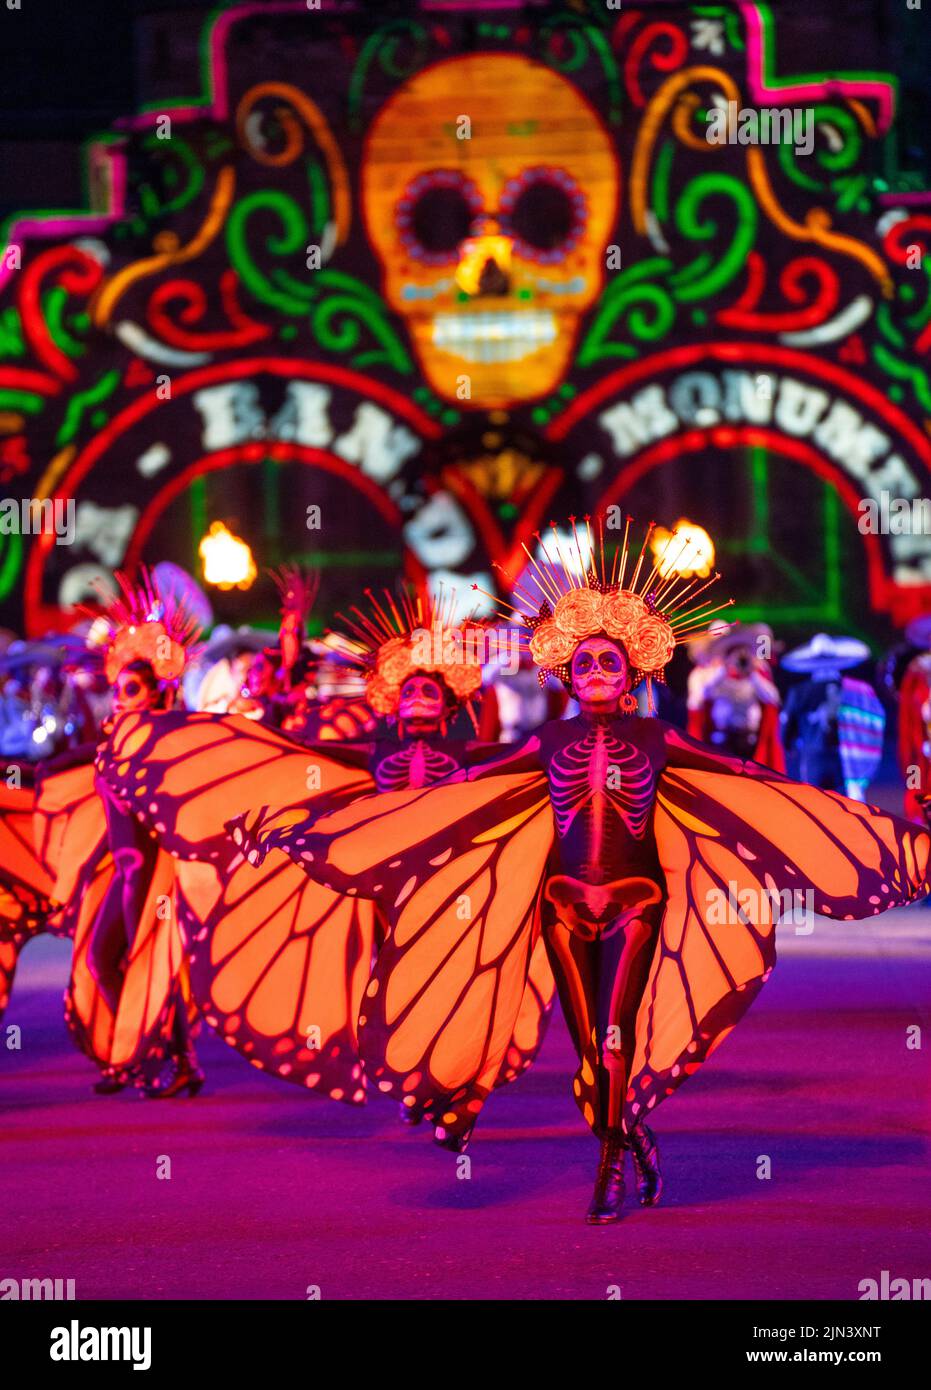 Edinburgh, Scotland, UK. 8th August 2022. The Banda Monumental de Mexico perform exciting dances based on traditional Mexican history and culture. Pic; The company perform The Day of the Dead in elaborate makeup and costume. Iain Masterton/Alamy Live News Stock Photo